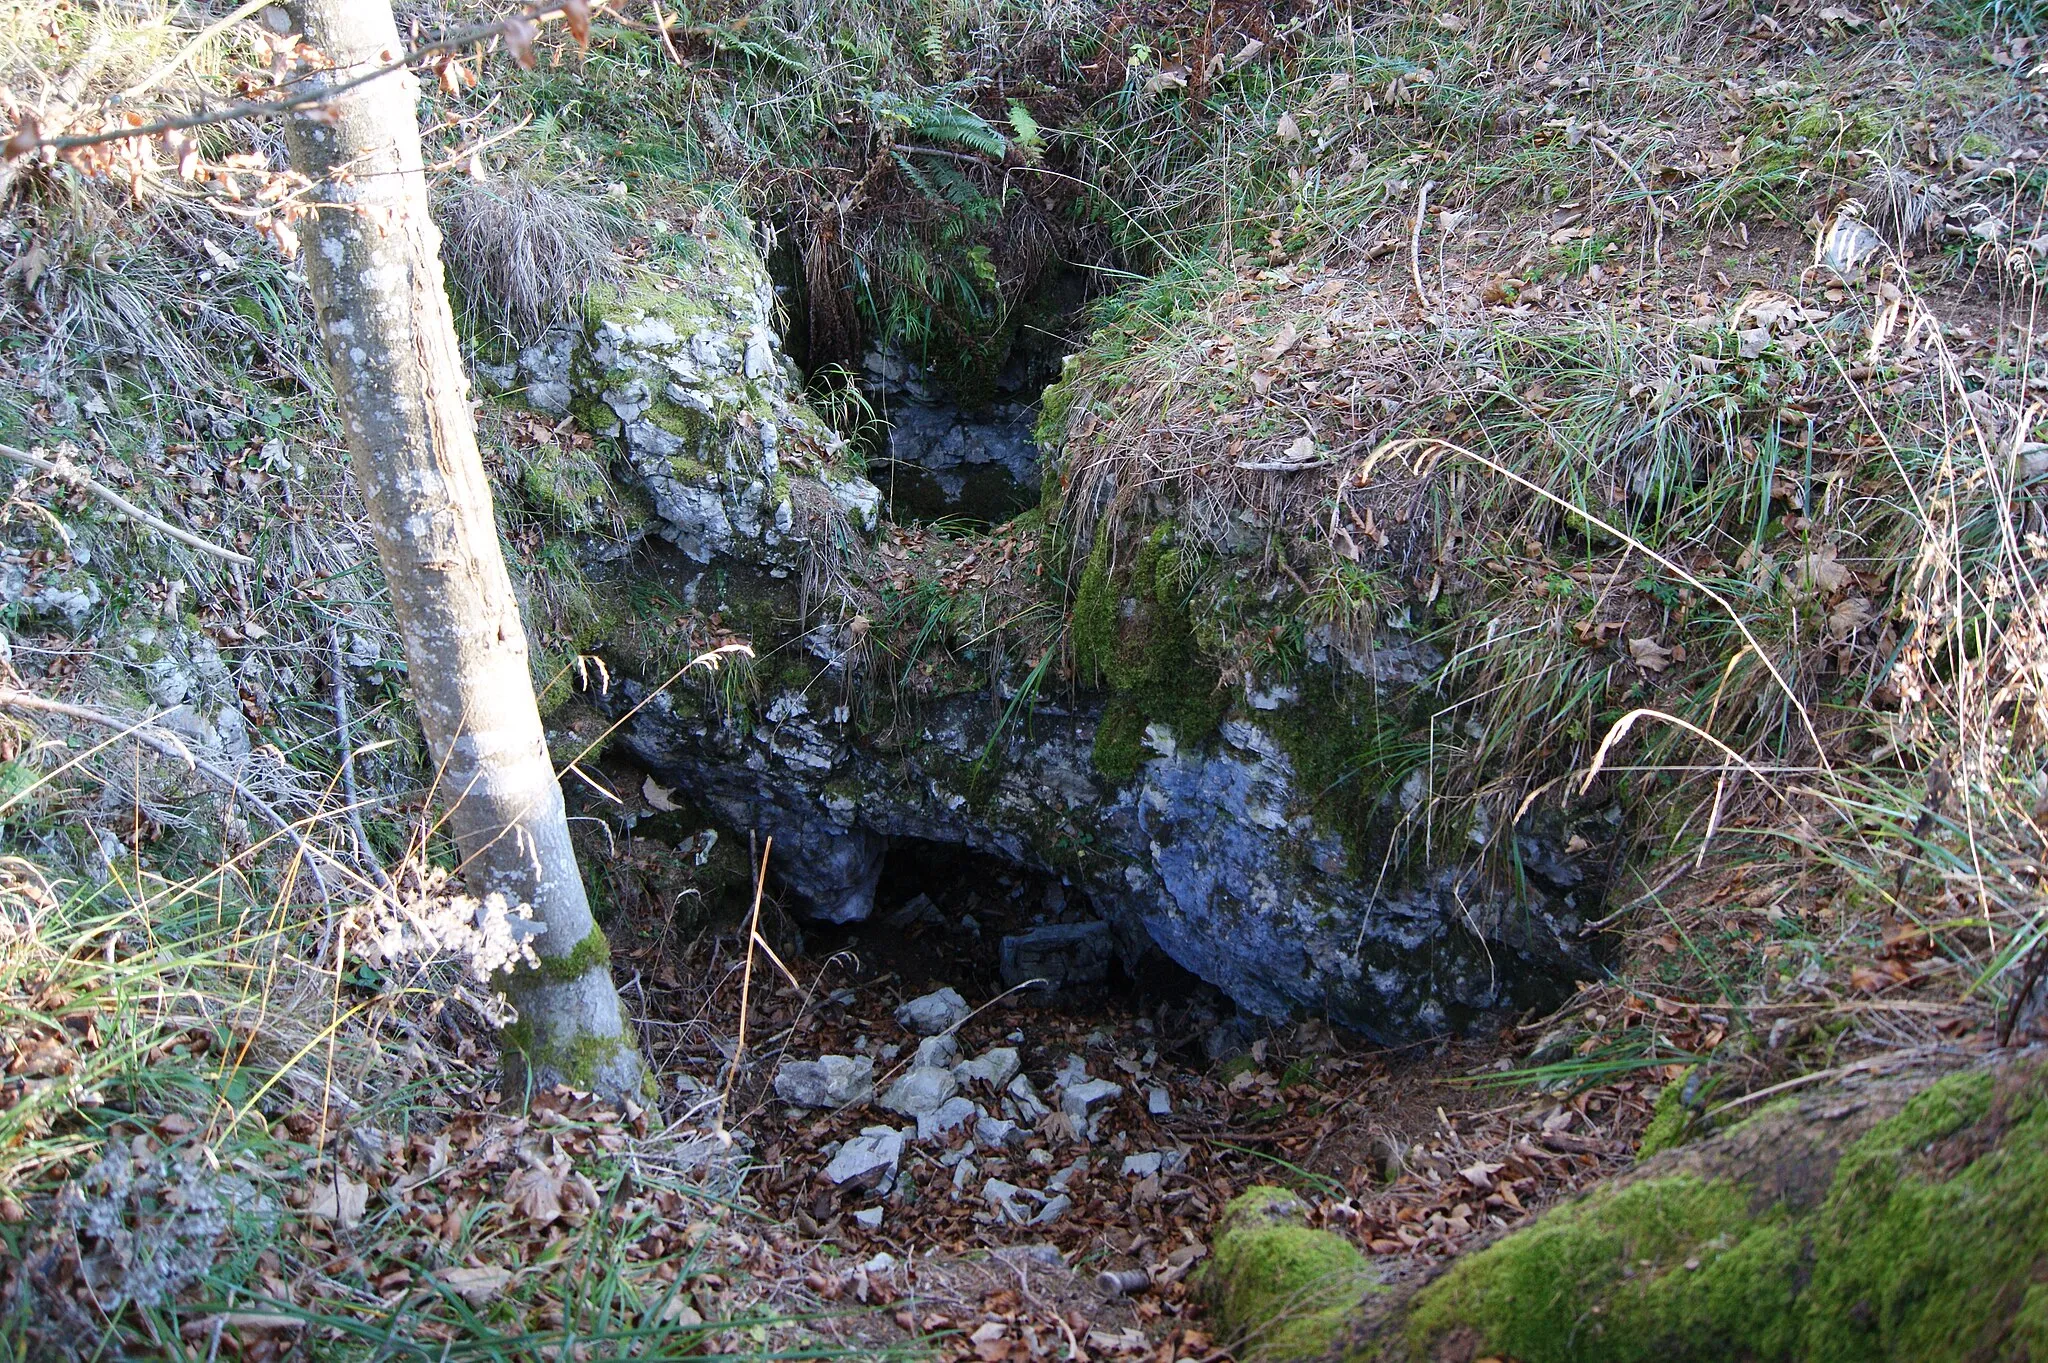 Photo showing: Wildemaennlisloch in Viktorsberg, Vorarlberg, Austria. Two small connected sinkholes (Doline) in the limestone with a small natural bridge.